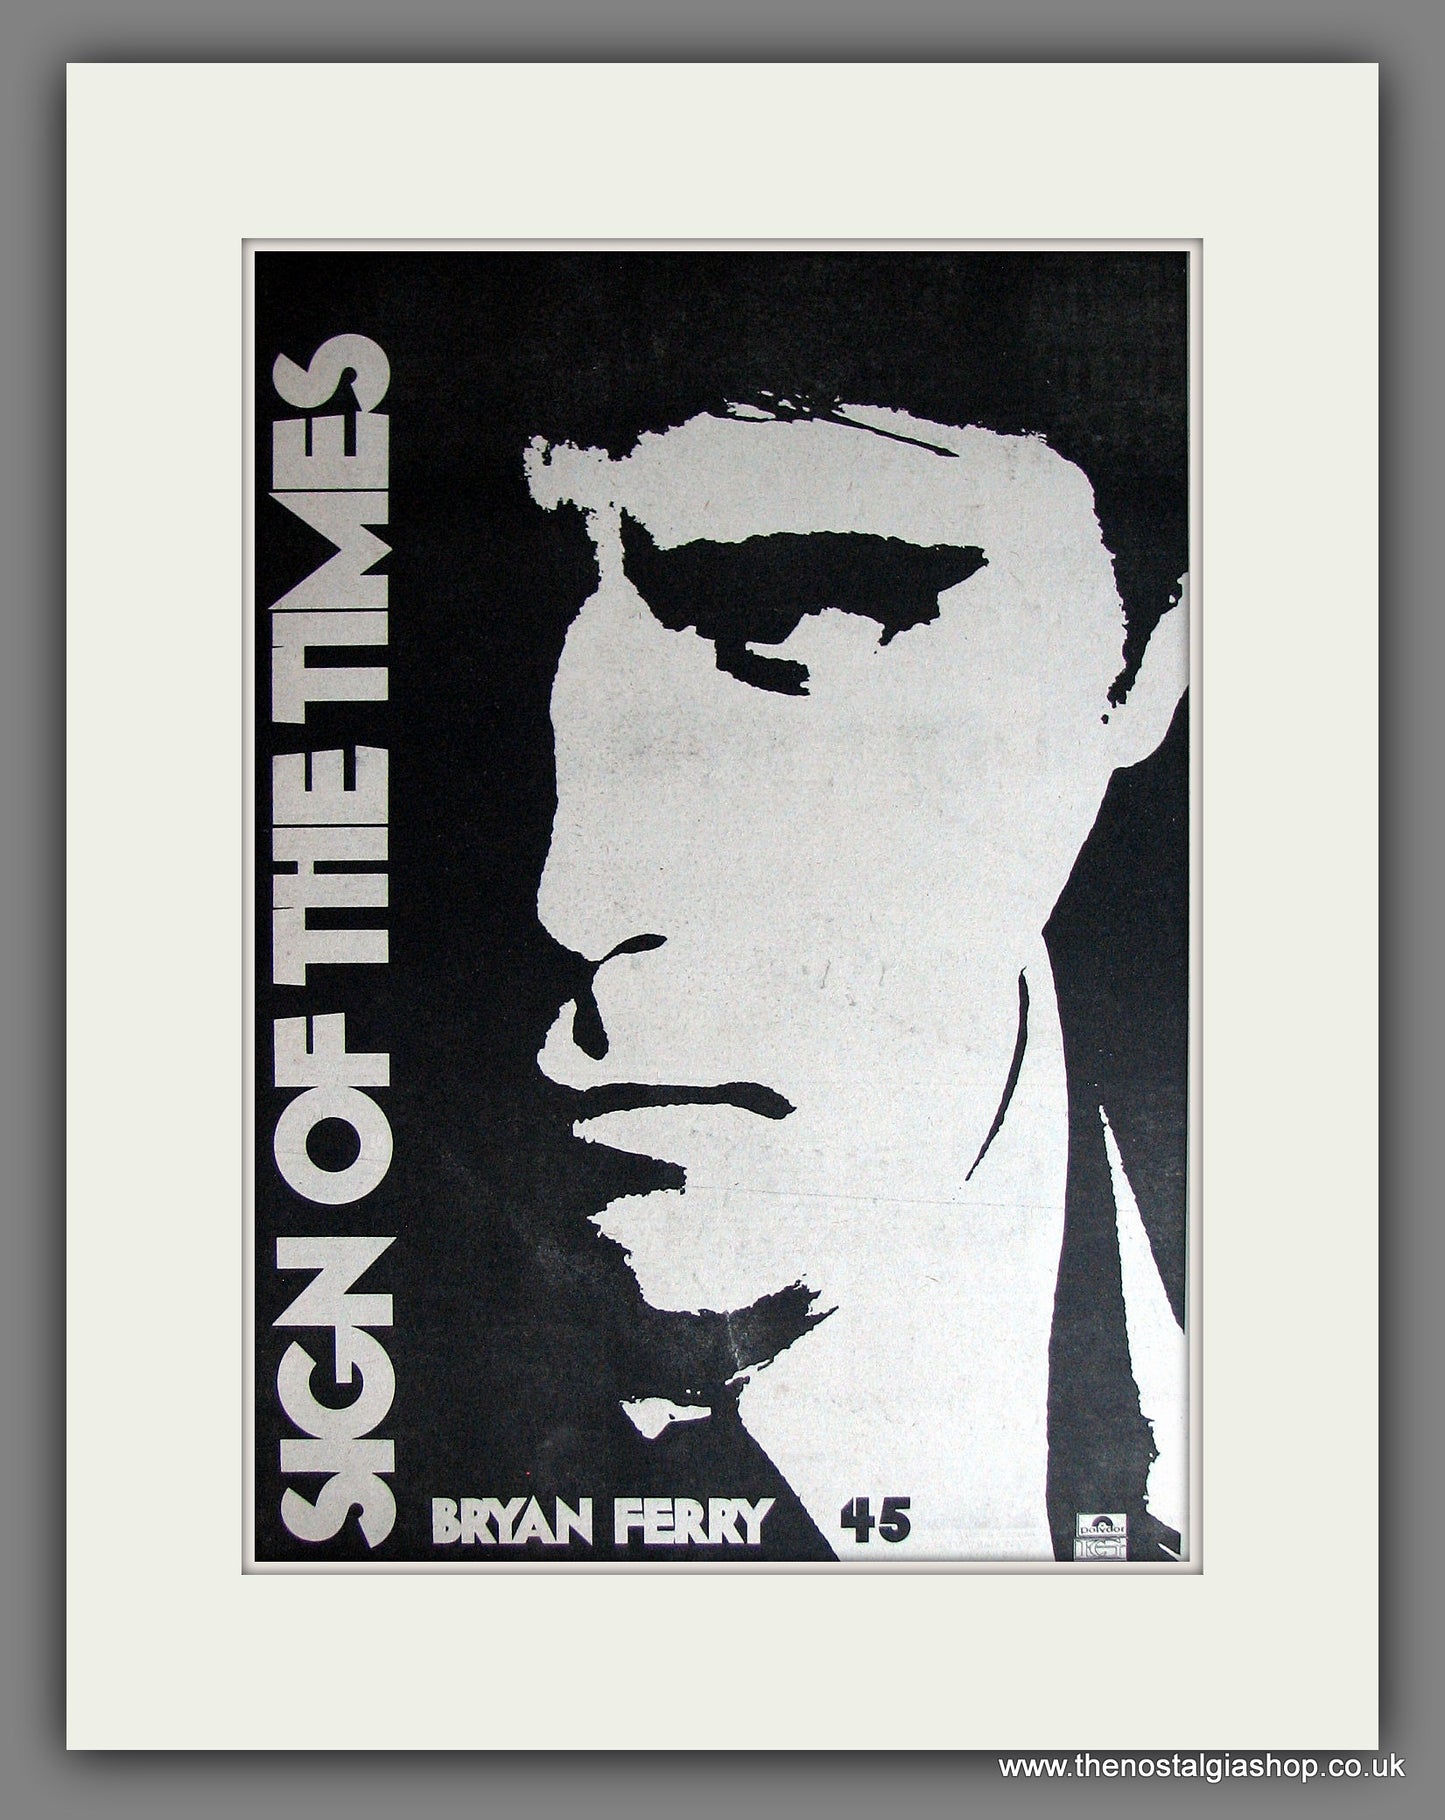 Bryan Ferry Sign Of The Times. Vintage Advert 1978 (ref AD14026)